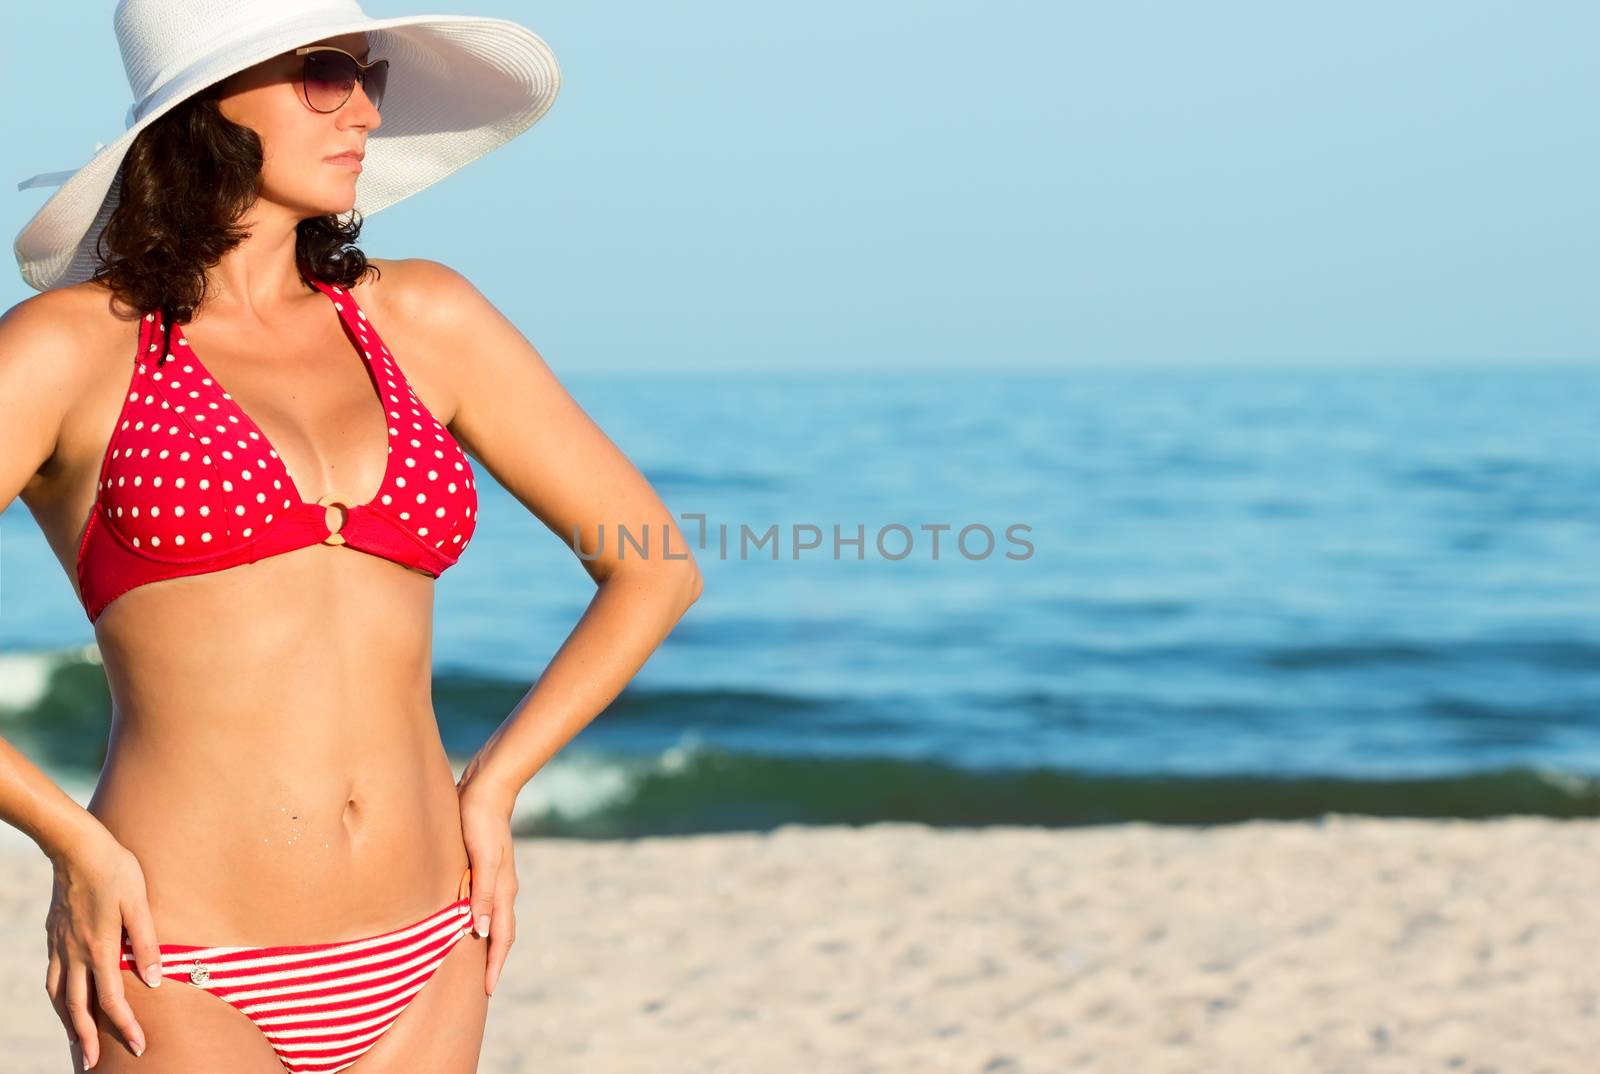 Young woman on beach by Valengilda